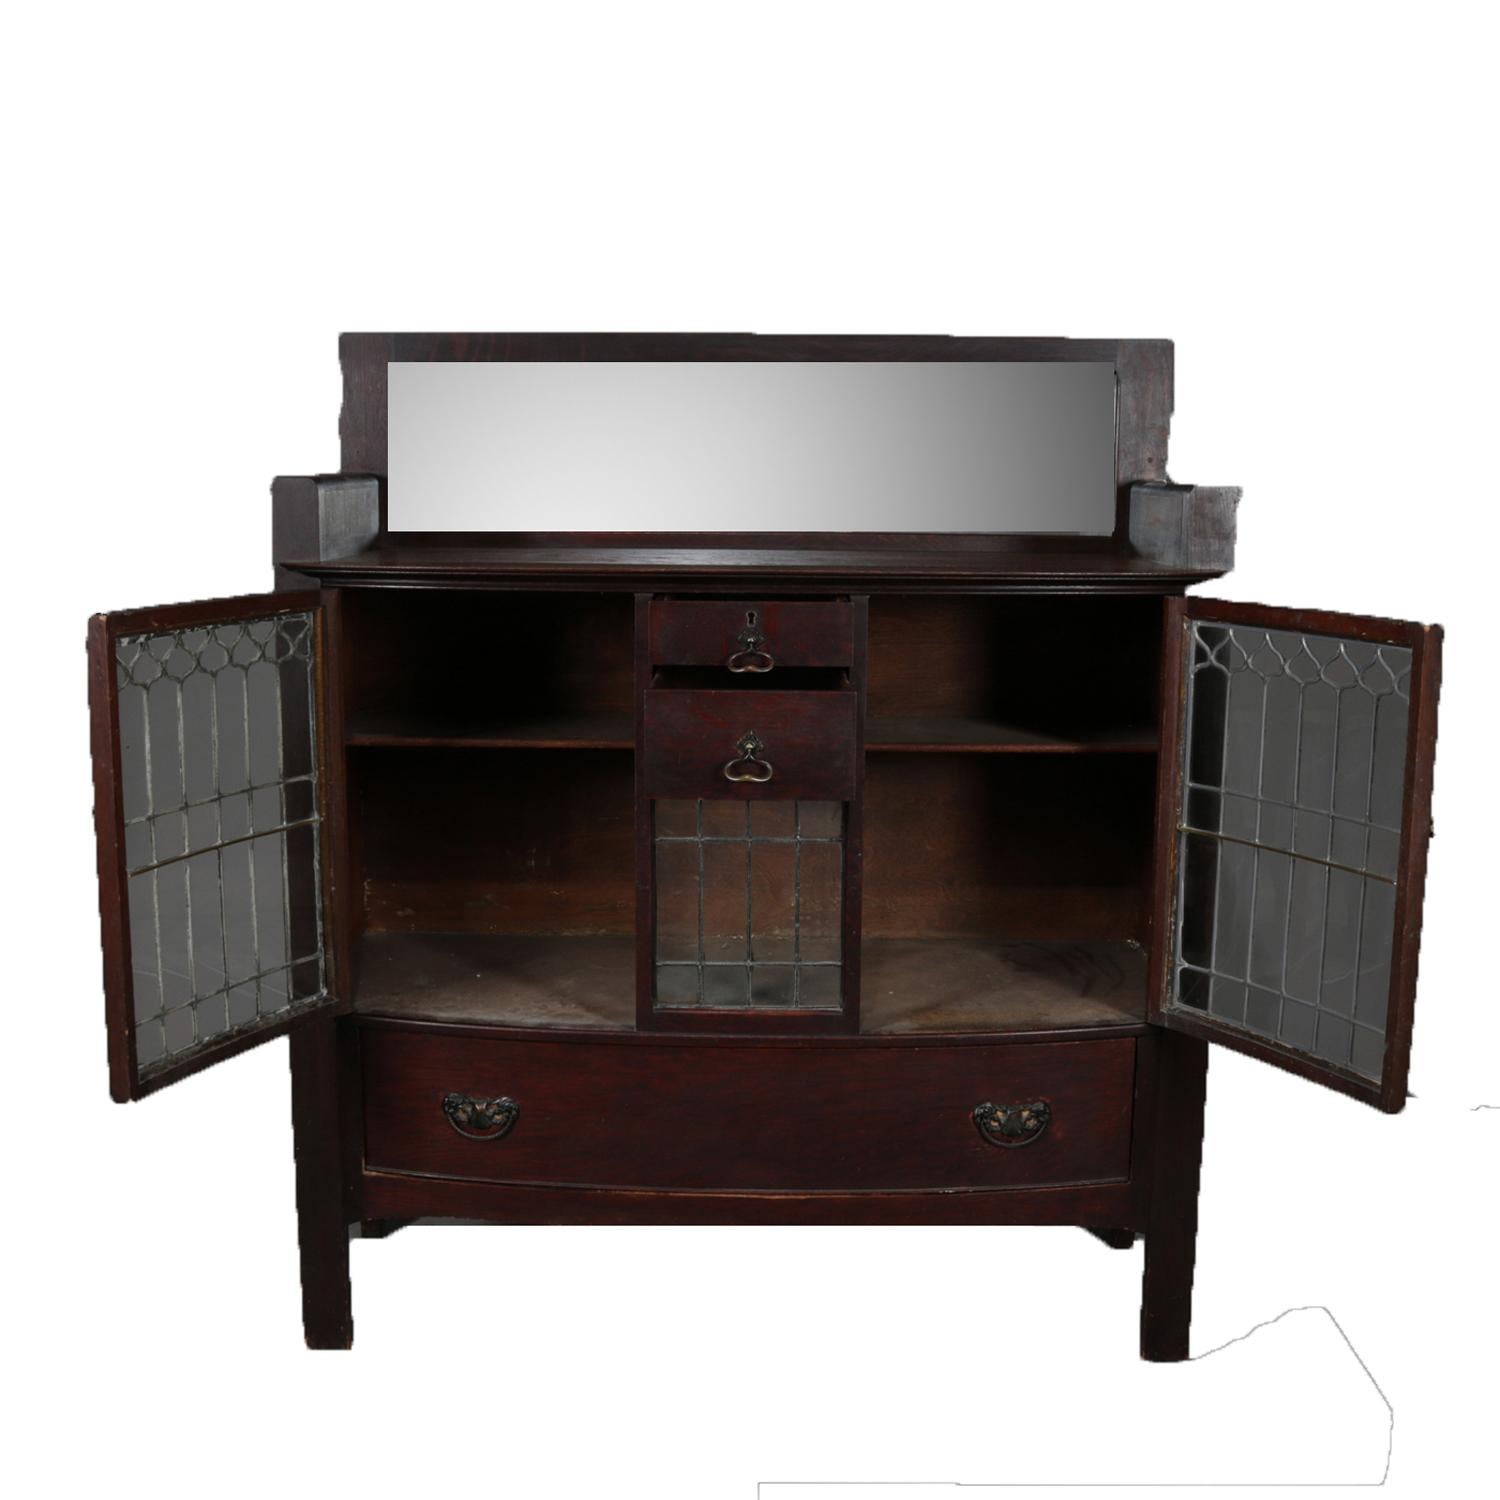 Antique Arts & Crafts Stickley Brothers & Co. server features oak construction with mirrored backsplash over case with central drawers flanked by leaded glass doors and over single long drawer, en verso original tag, circa 1910.

Measures: 55.25